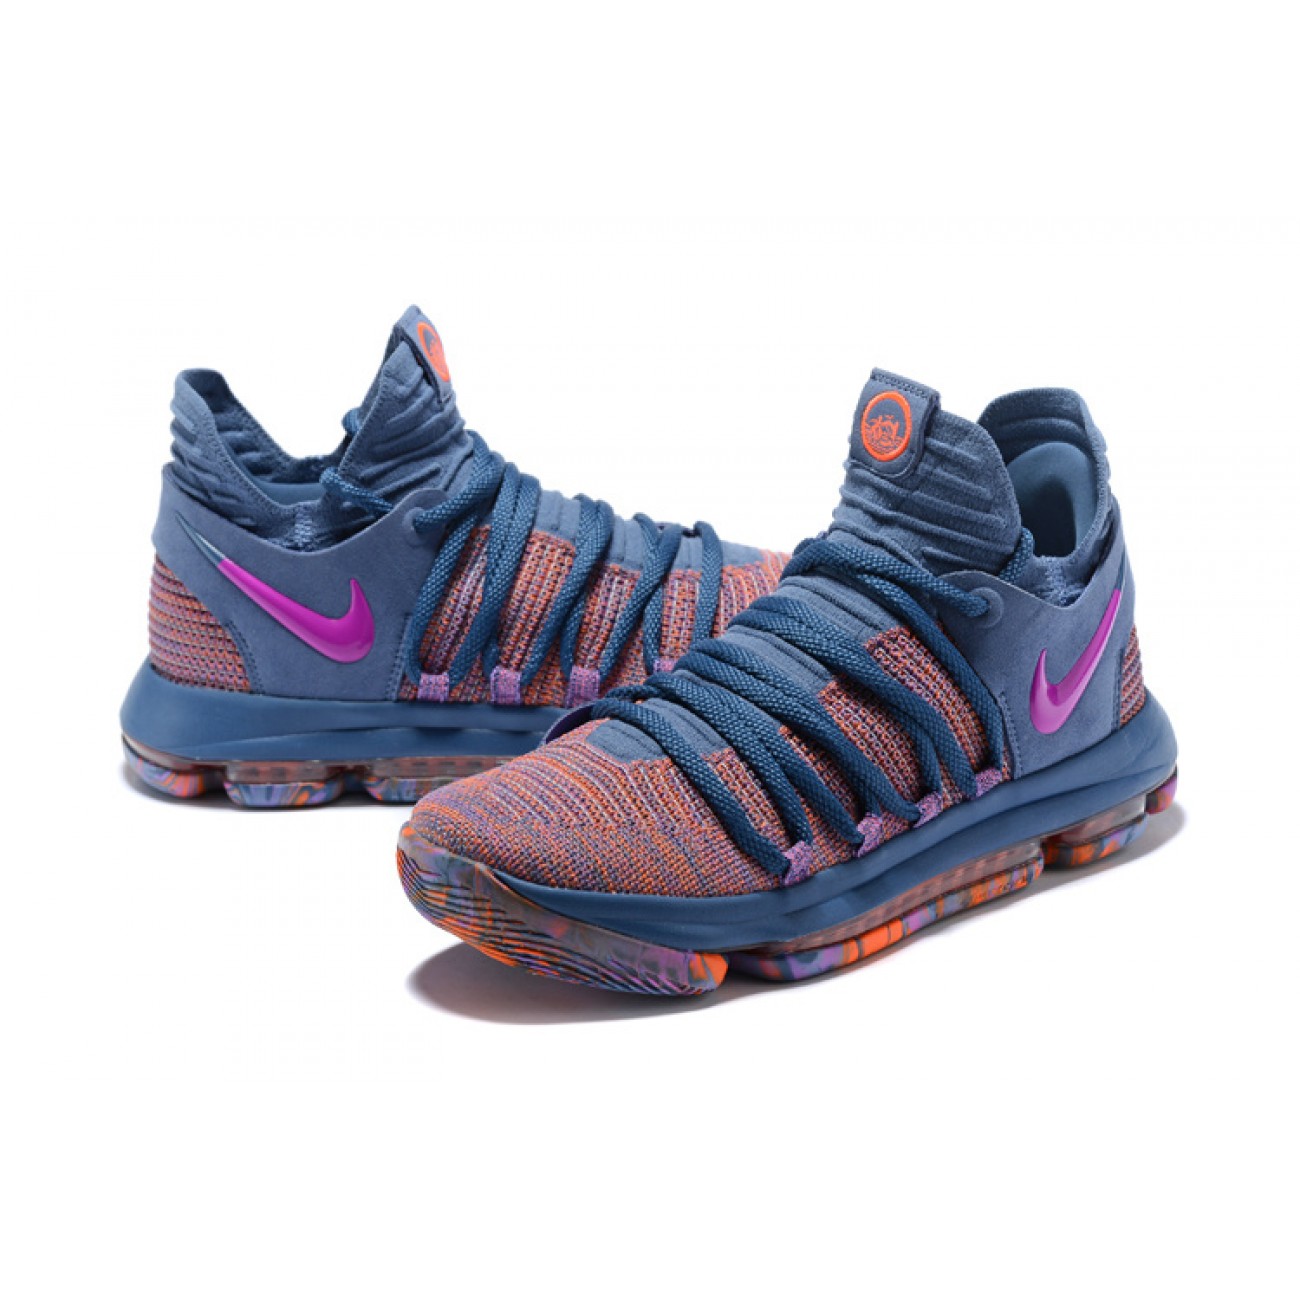 Kevin Durant KD10 "All Star" Blue/Pink